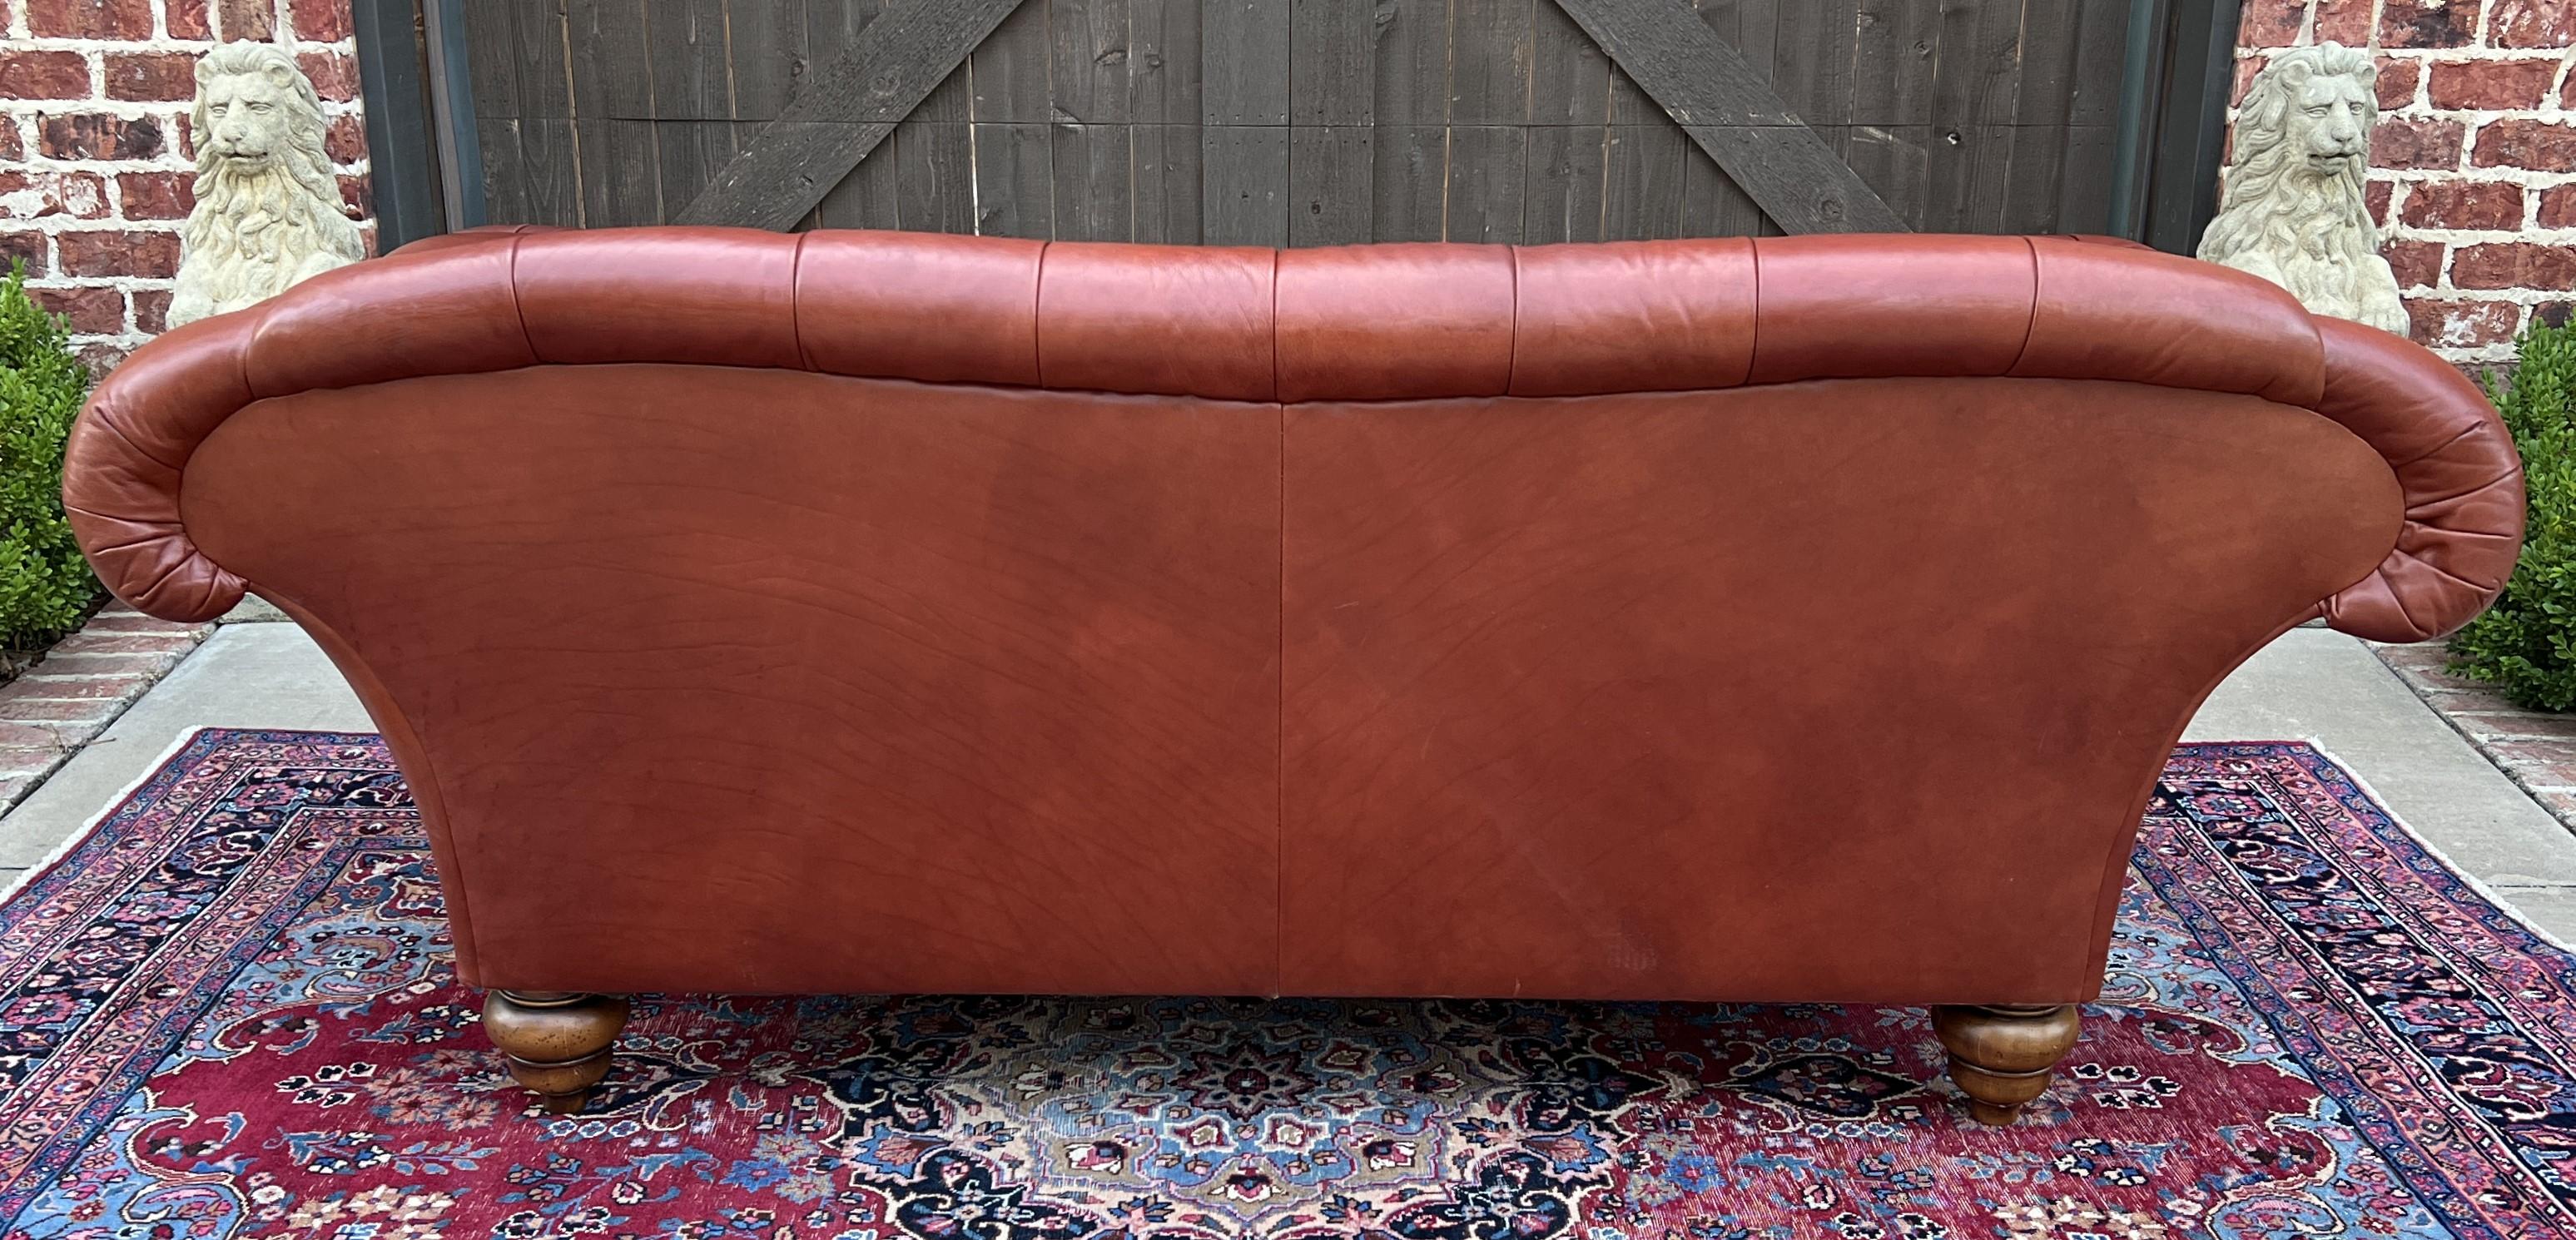 Vintage English Chesterfield Leather Tufted Sofa Brown Terra Cotta Mid Century For Sale 10